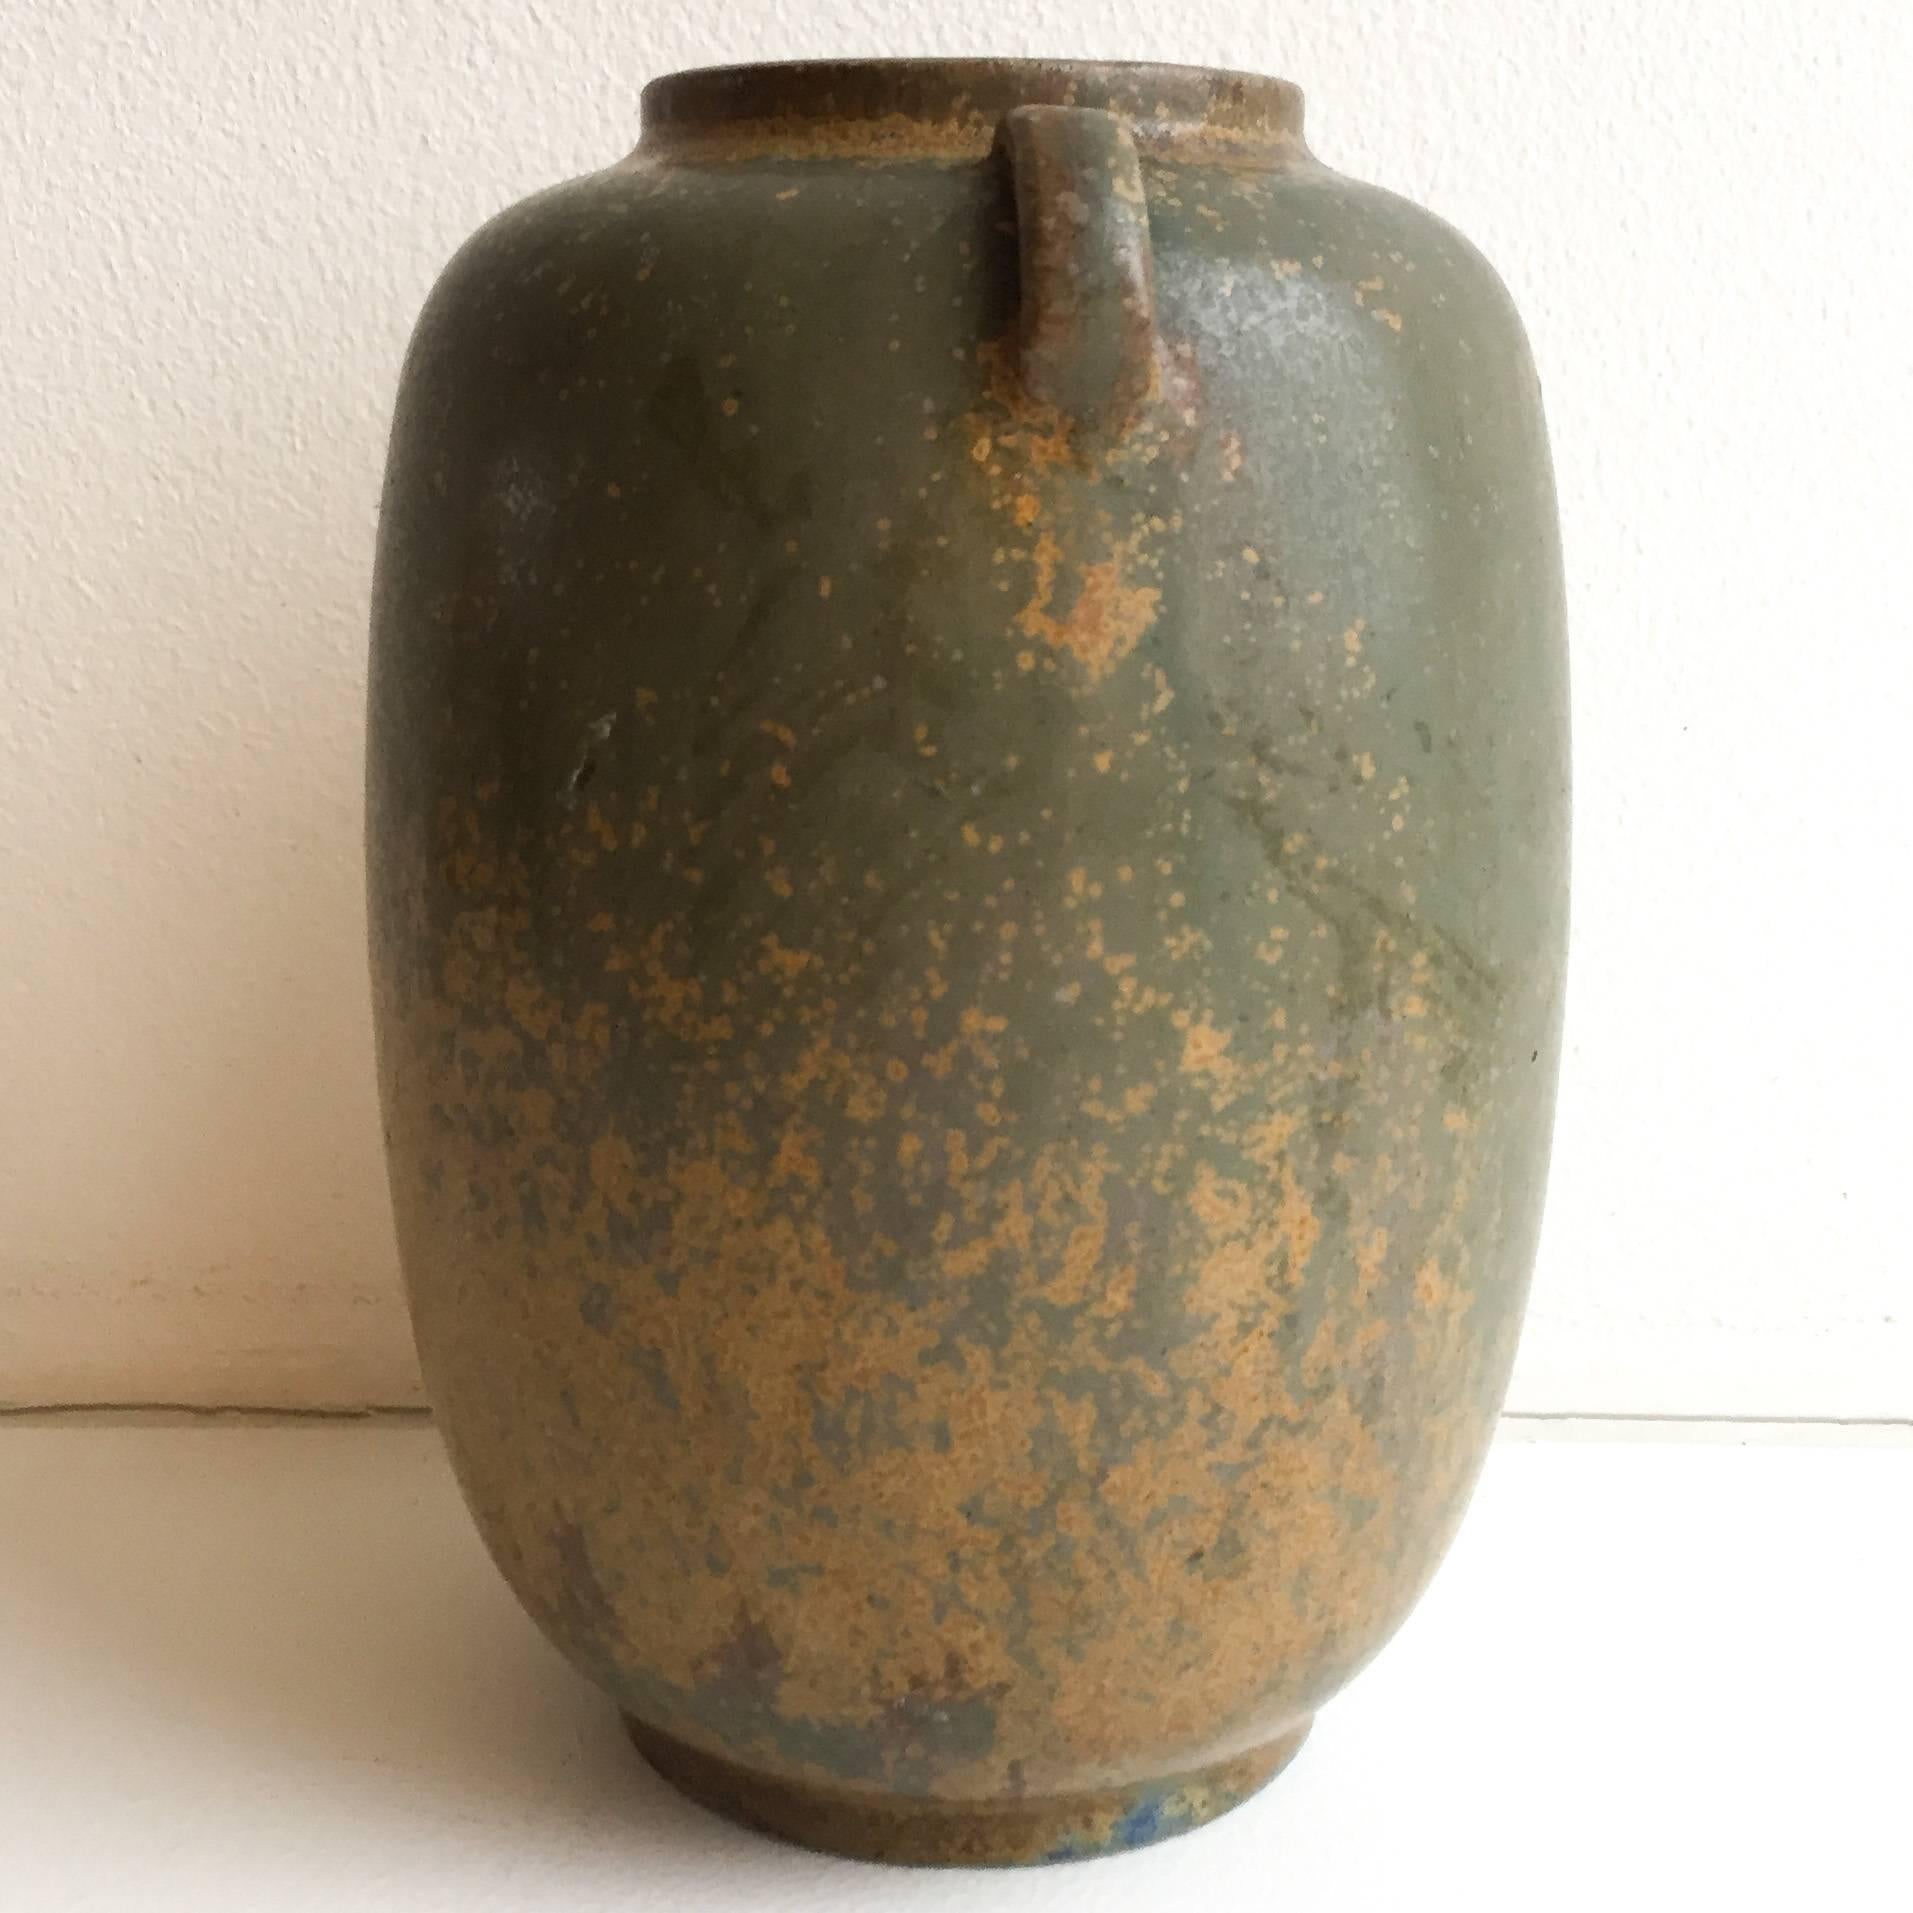 Arne Bang stoneware vase model 222 signed with his initials.
Small imperfections in the glaze, see photo.
Otherwise in good condition.